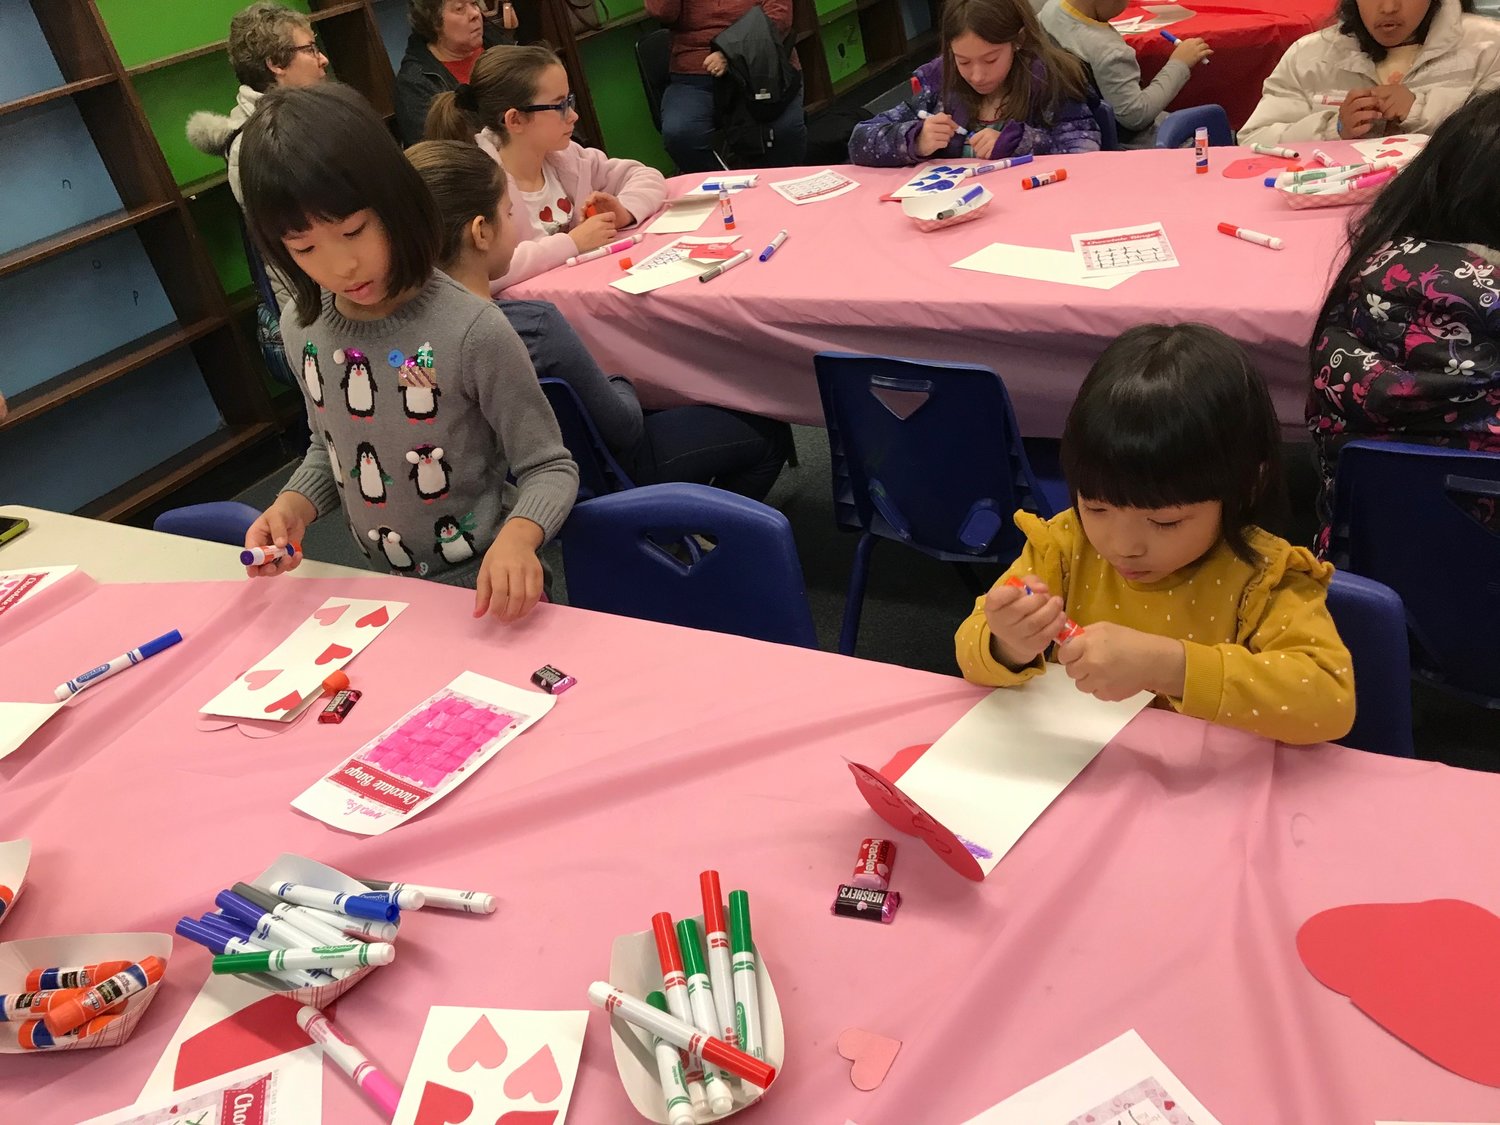 Anna Lisa Soe, left, and sister Victoria Soe work on their Valentine's Day crafts Saturday, Feb. 11 during a special children's program at the Utica Public Library.